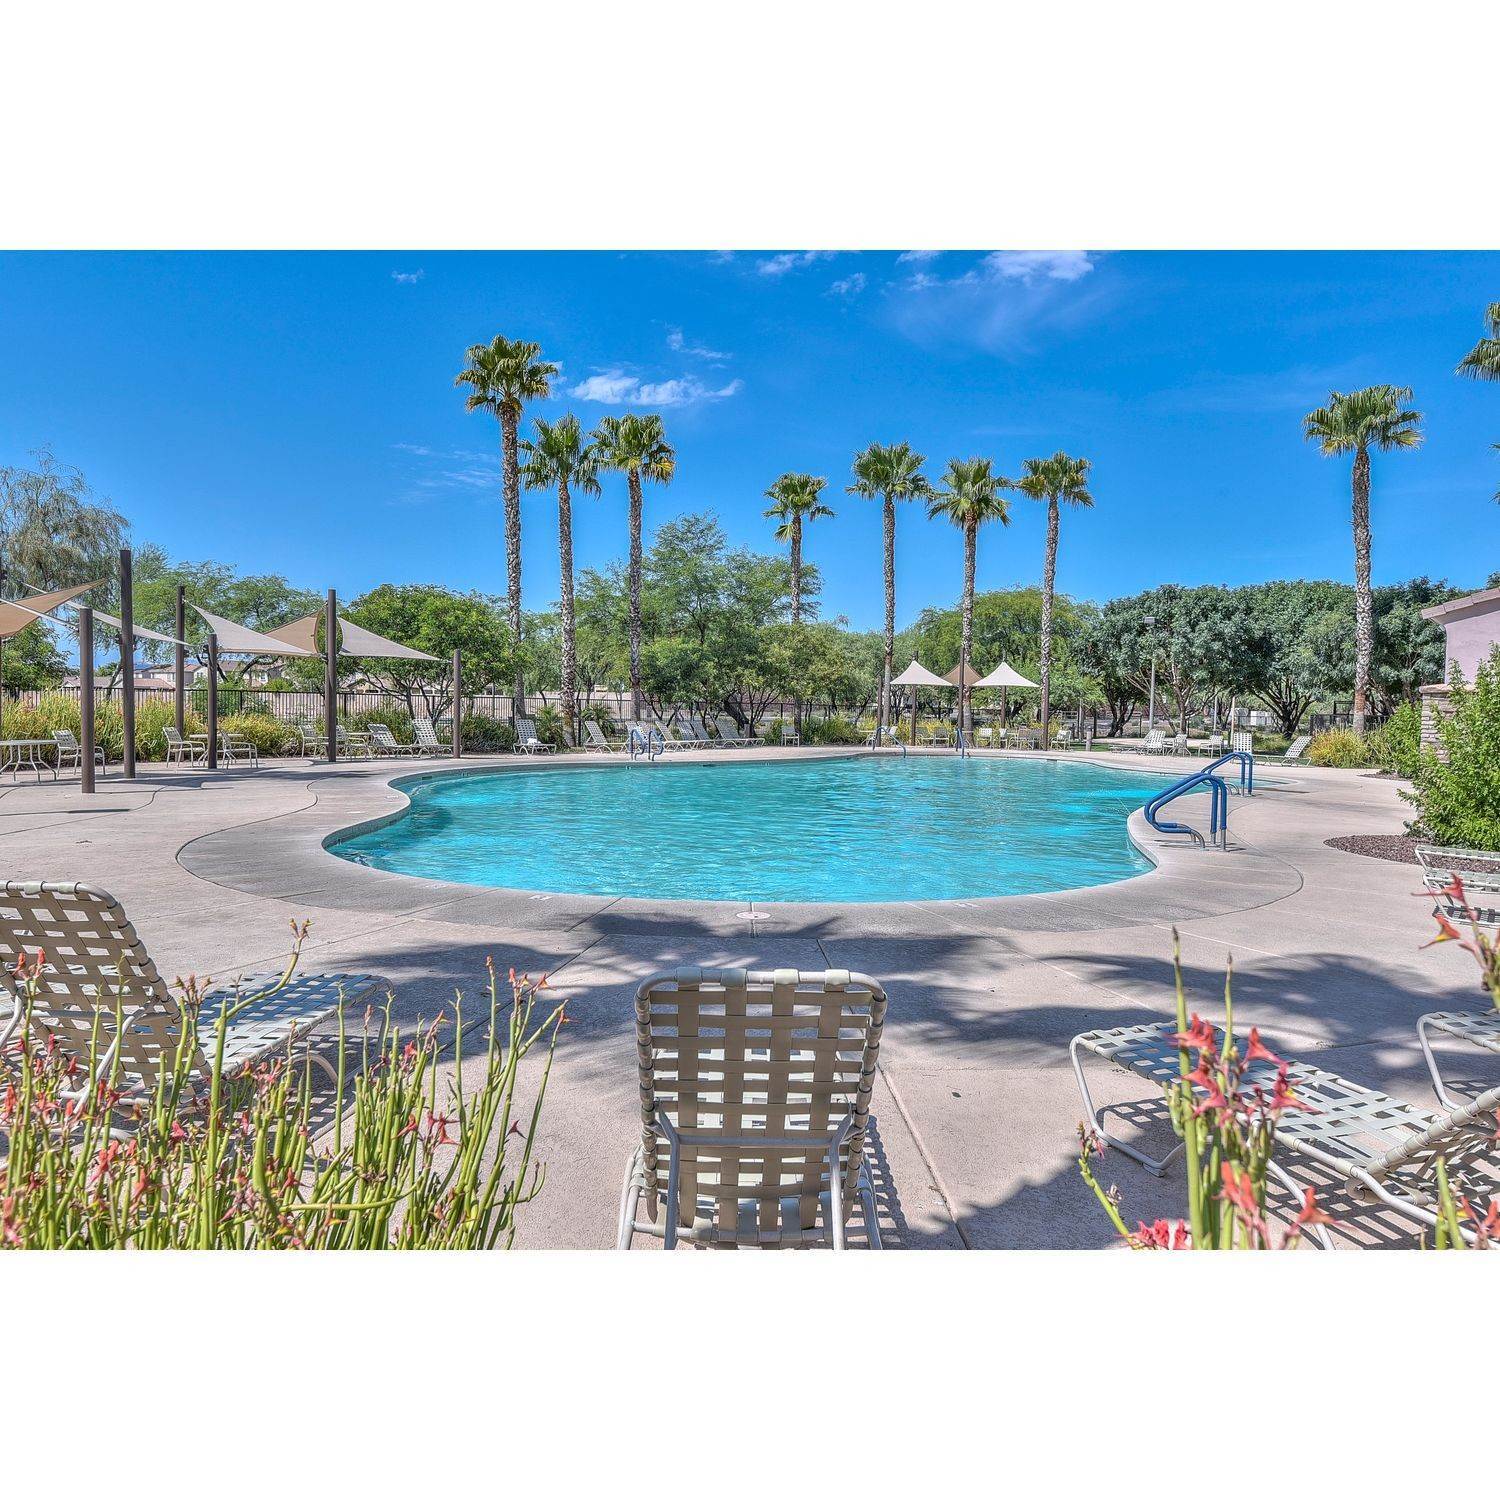 17580 W Oberlin Way, Surprise, AZ 85387에 The Enclaves at Desert Oasis 건물